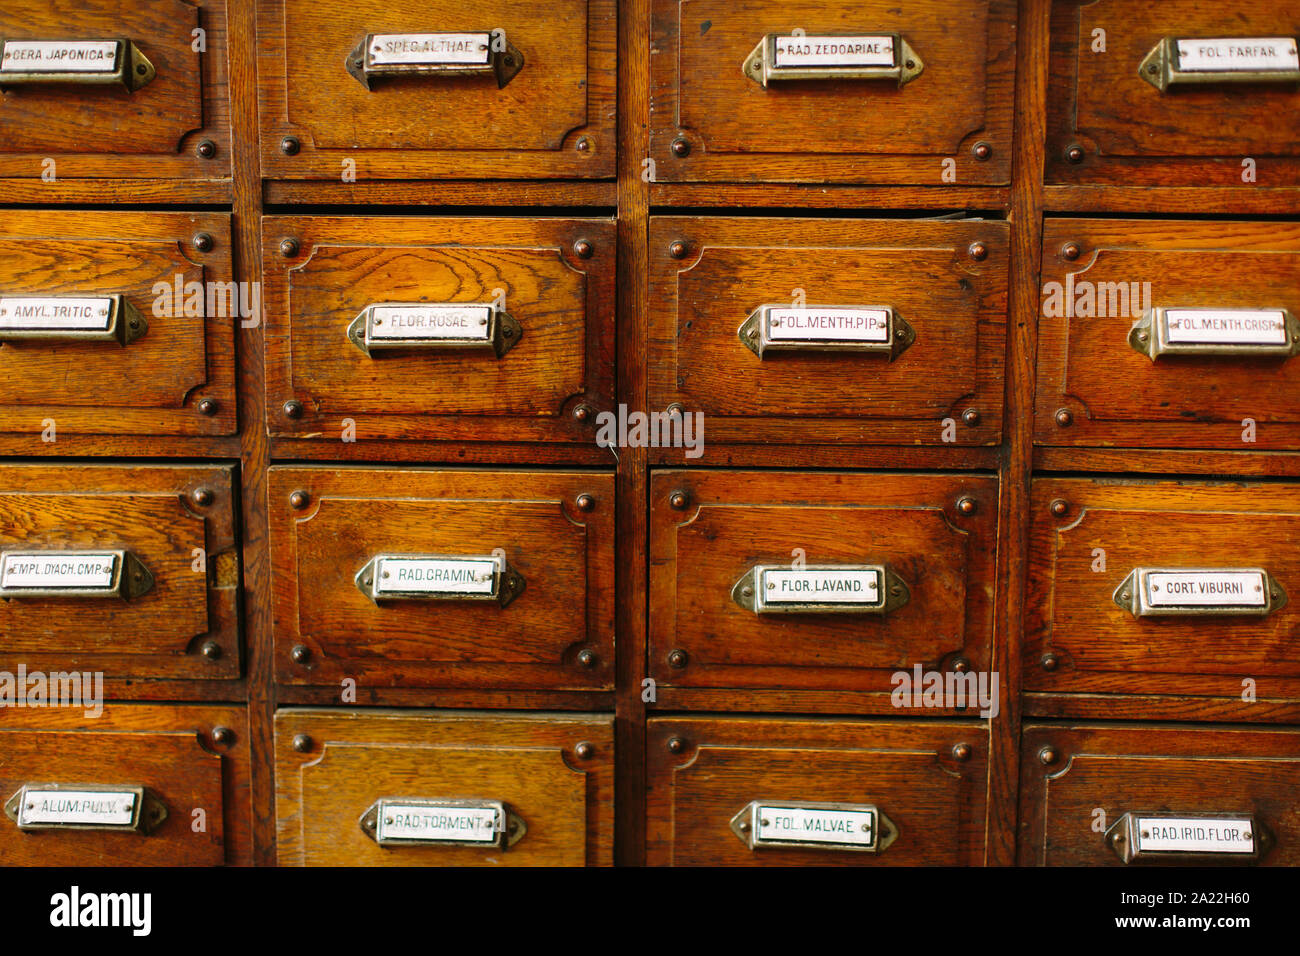 Old Pharmacy Drawer With Latin Names Of Drugs As A Texture Old